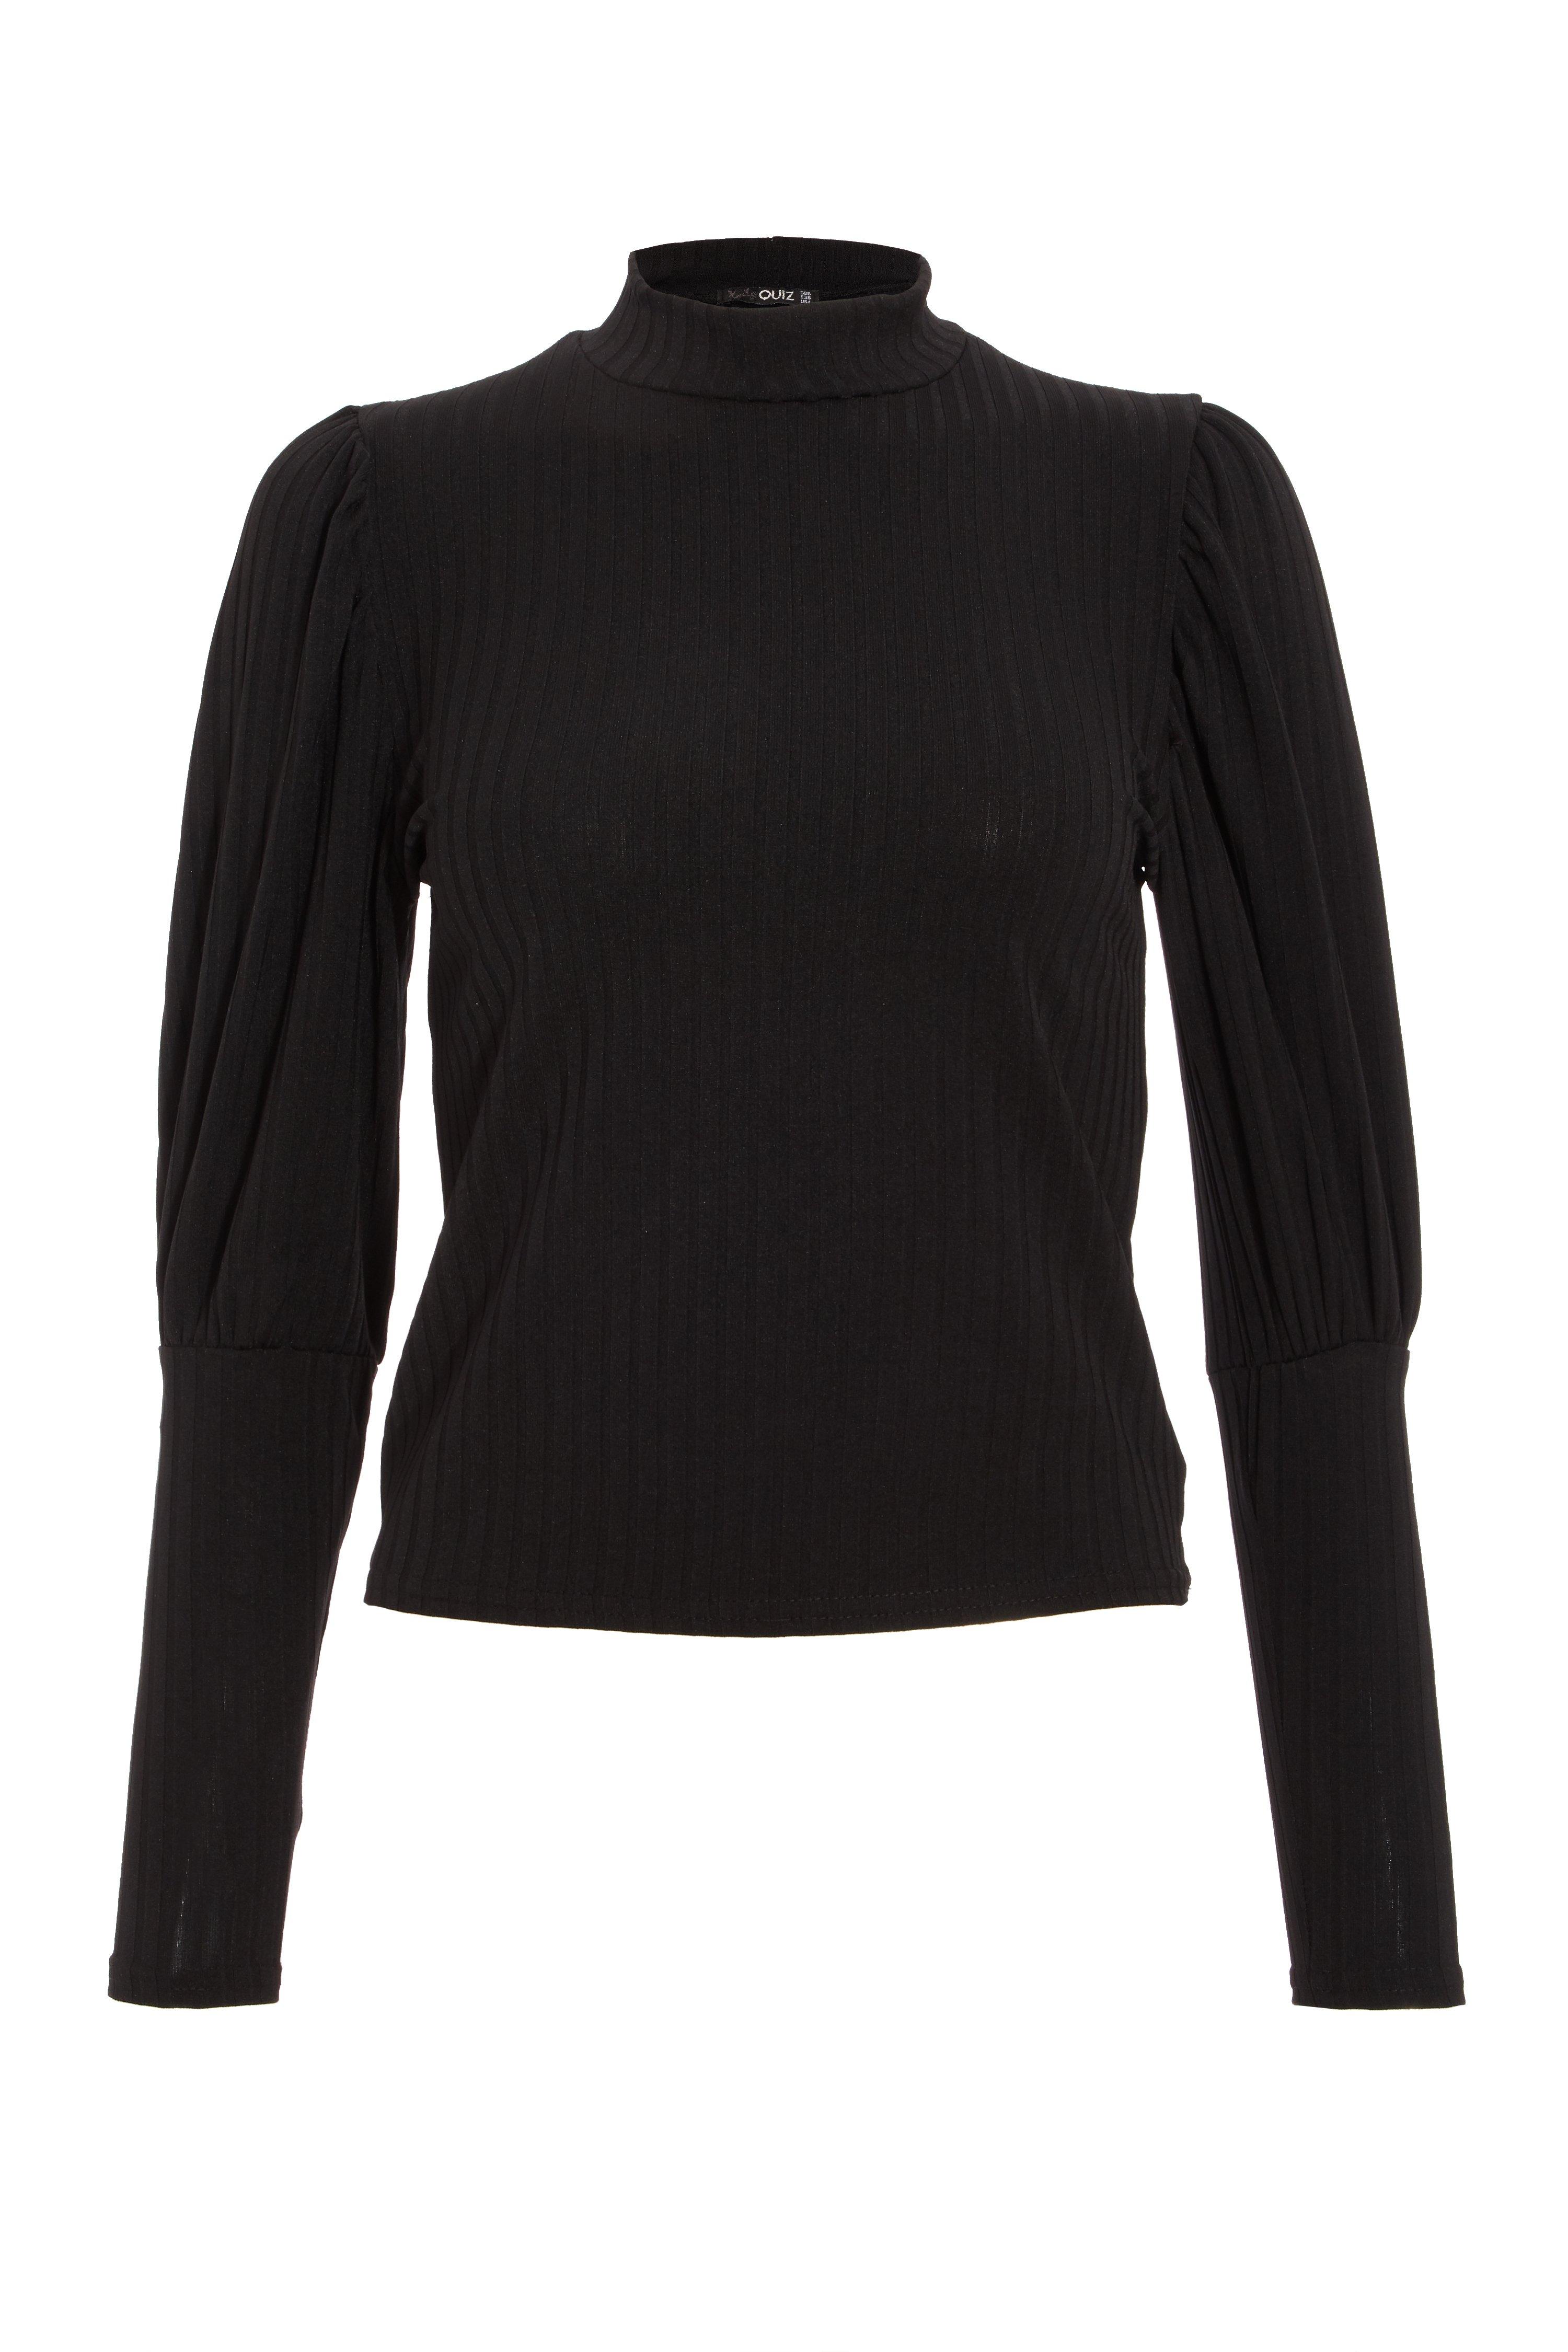 Petite Black Ribbed Puff Sleeve Top - Quiz Clothing